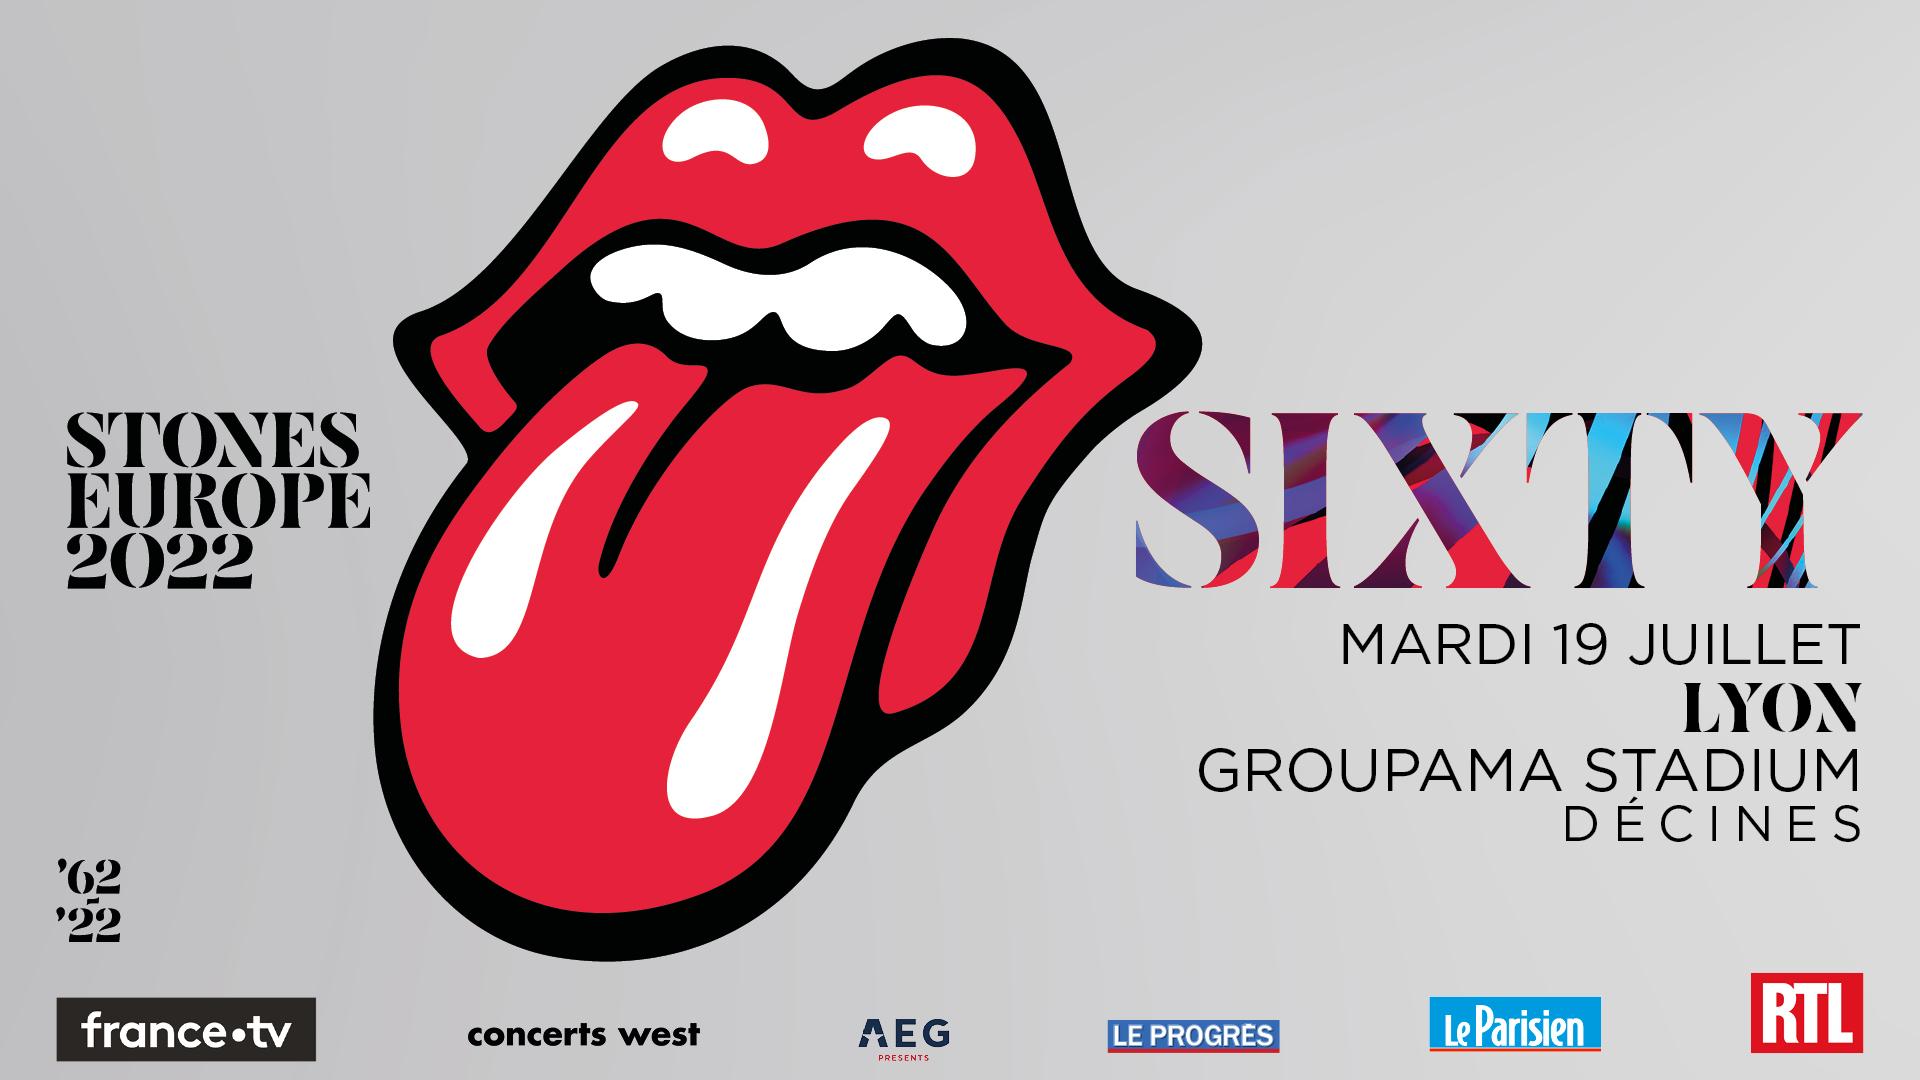 The Rolling Stones in concert at Groupama Stadium this summer!